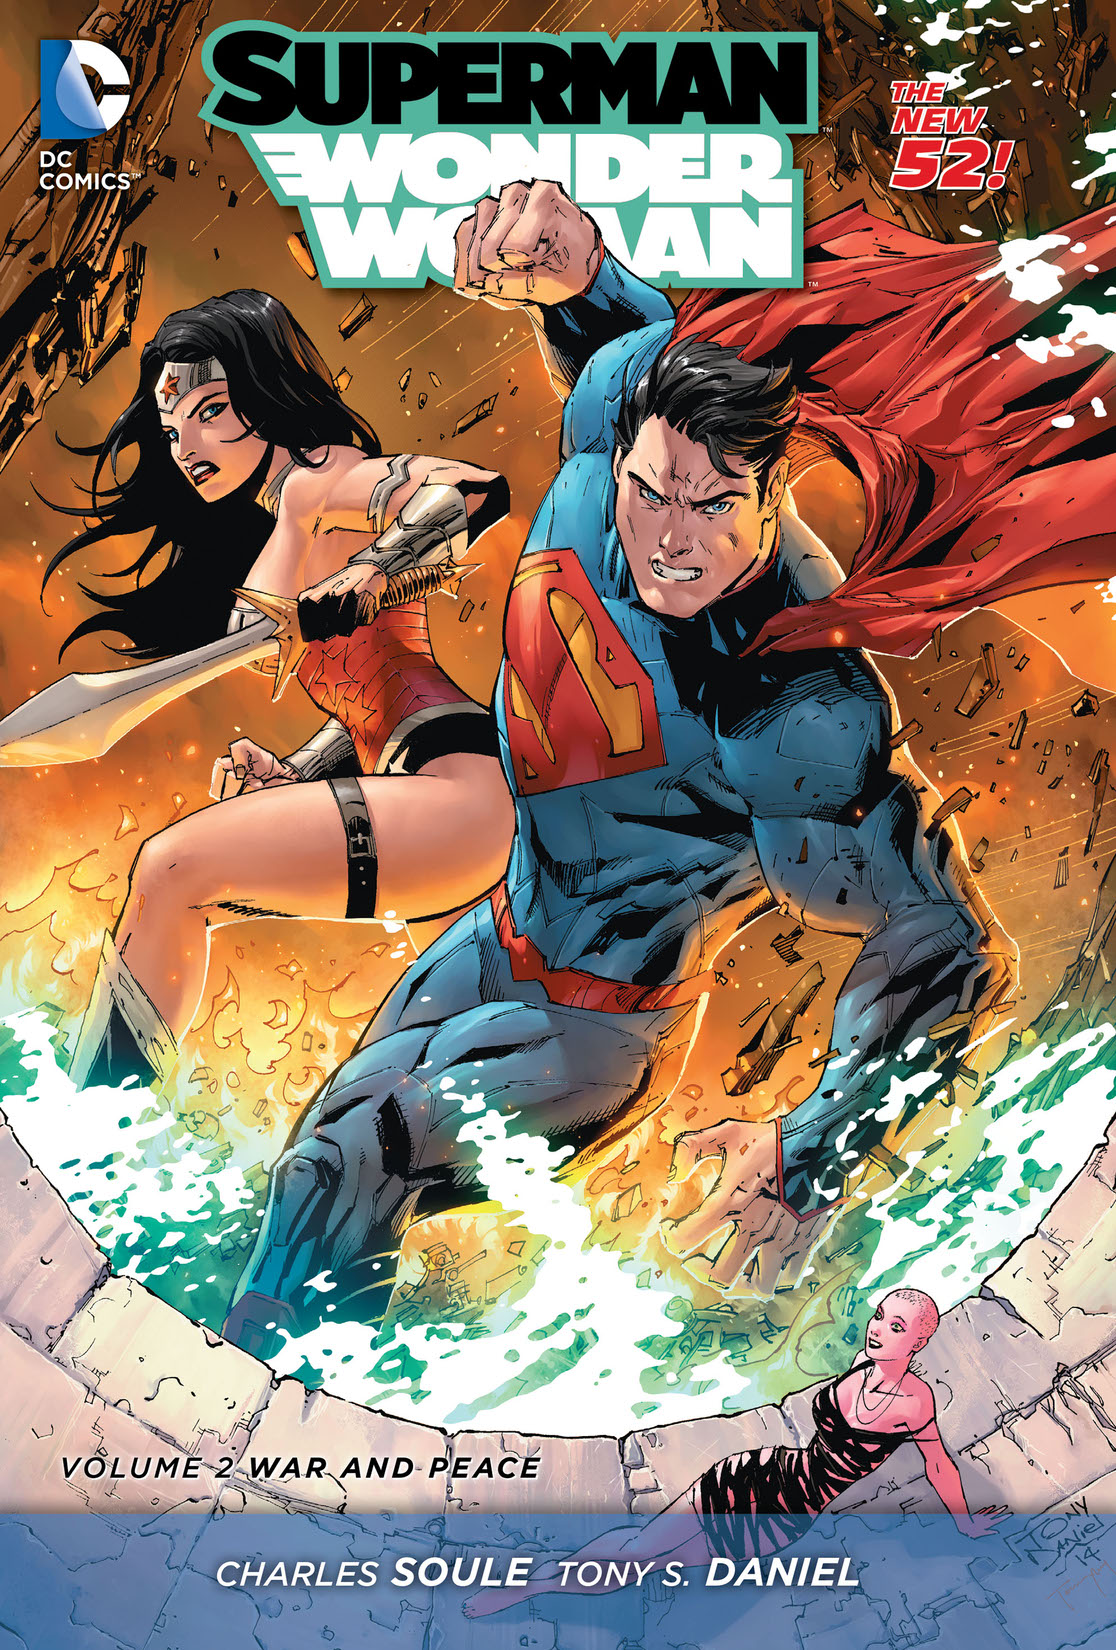 Superman/Wonder Woman Vol. 2: War and Peace preview images